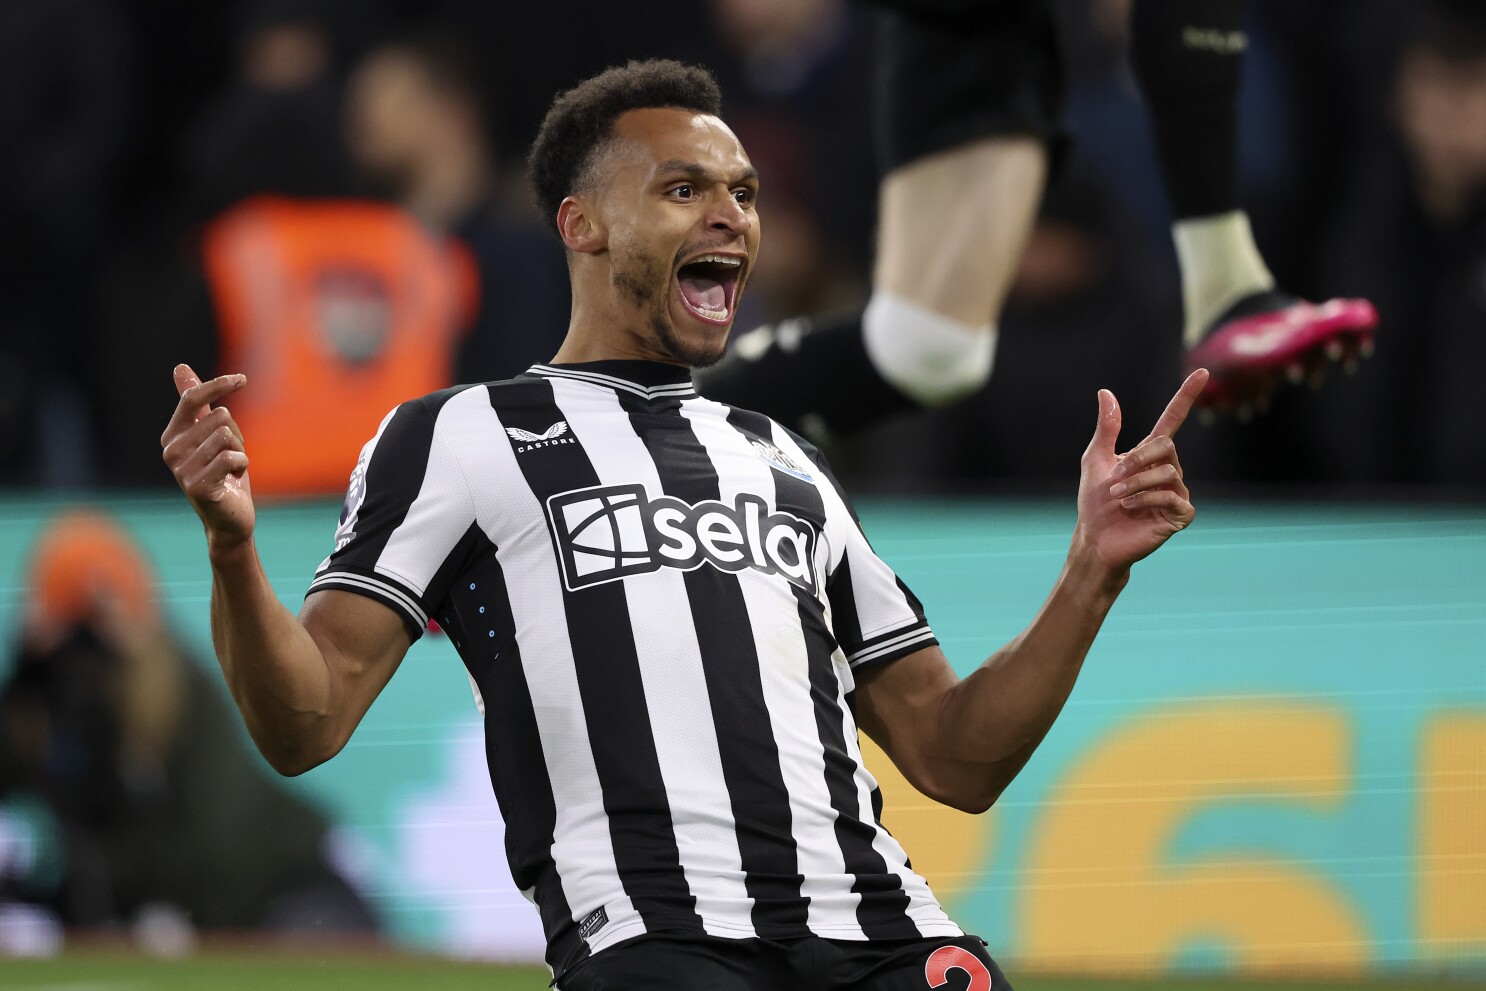 Newcastle Resurge in Champions League Pursuit with a Commanding 3-1 Victory Over Aston Villa on the Road